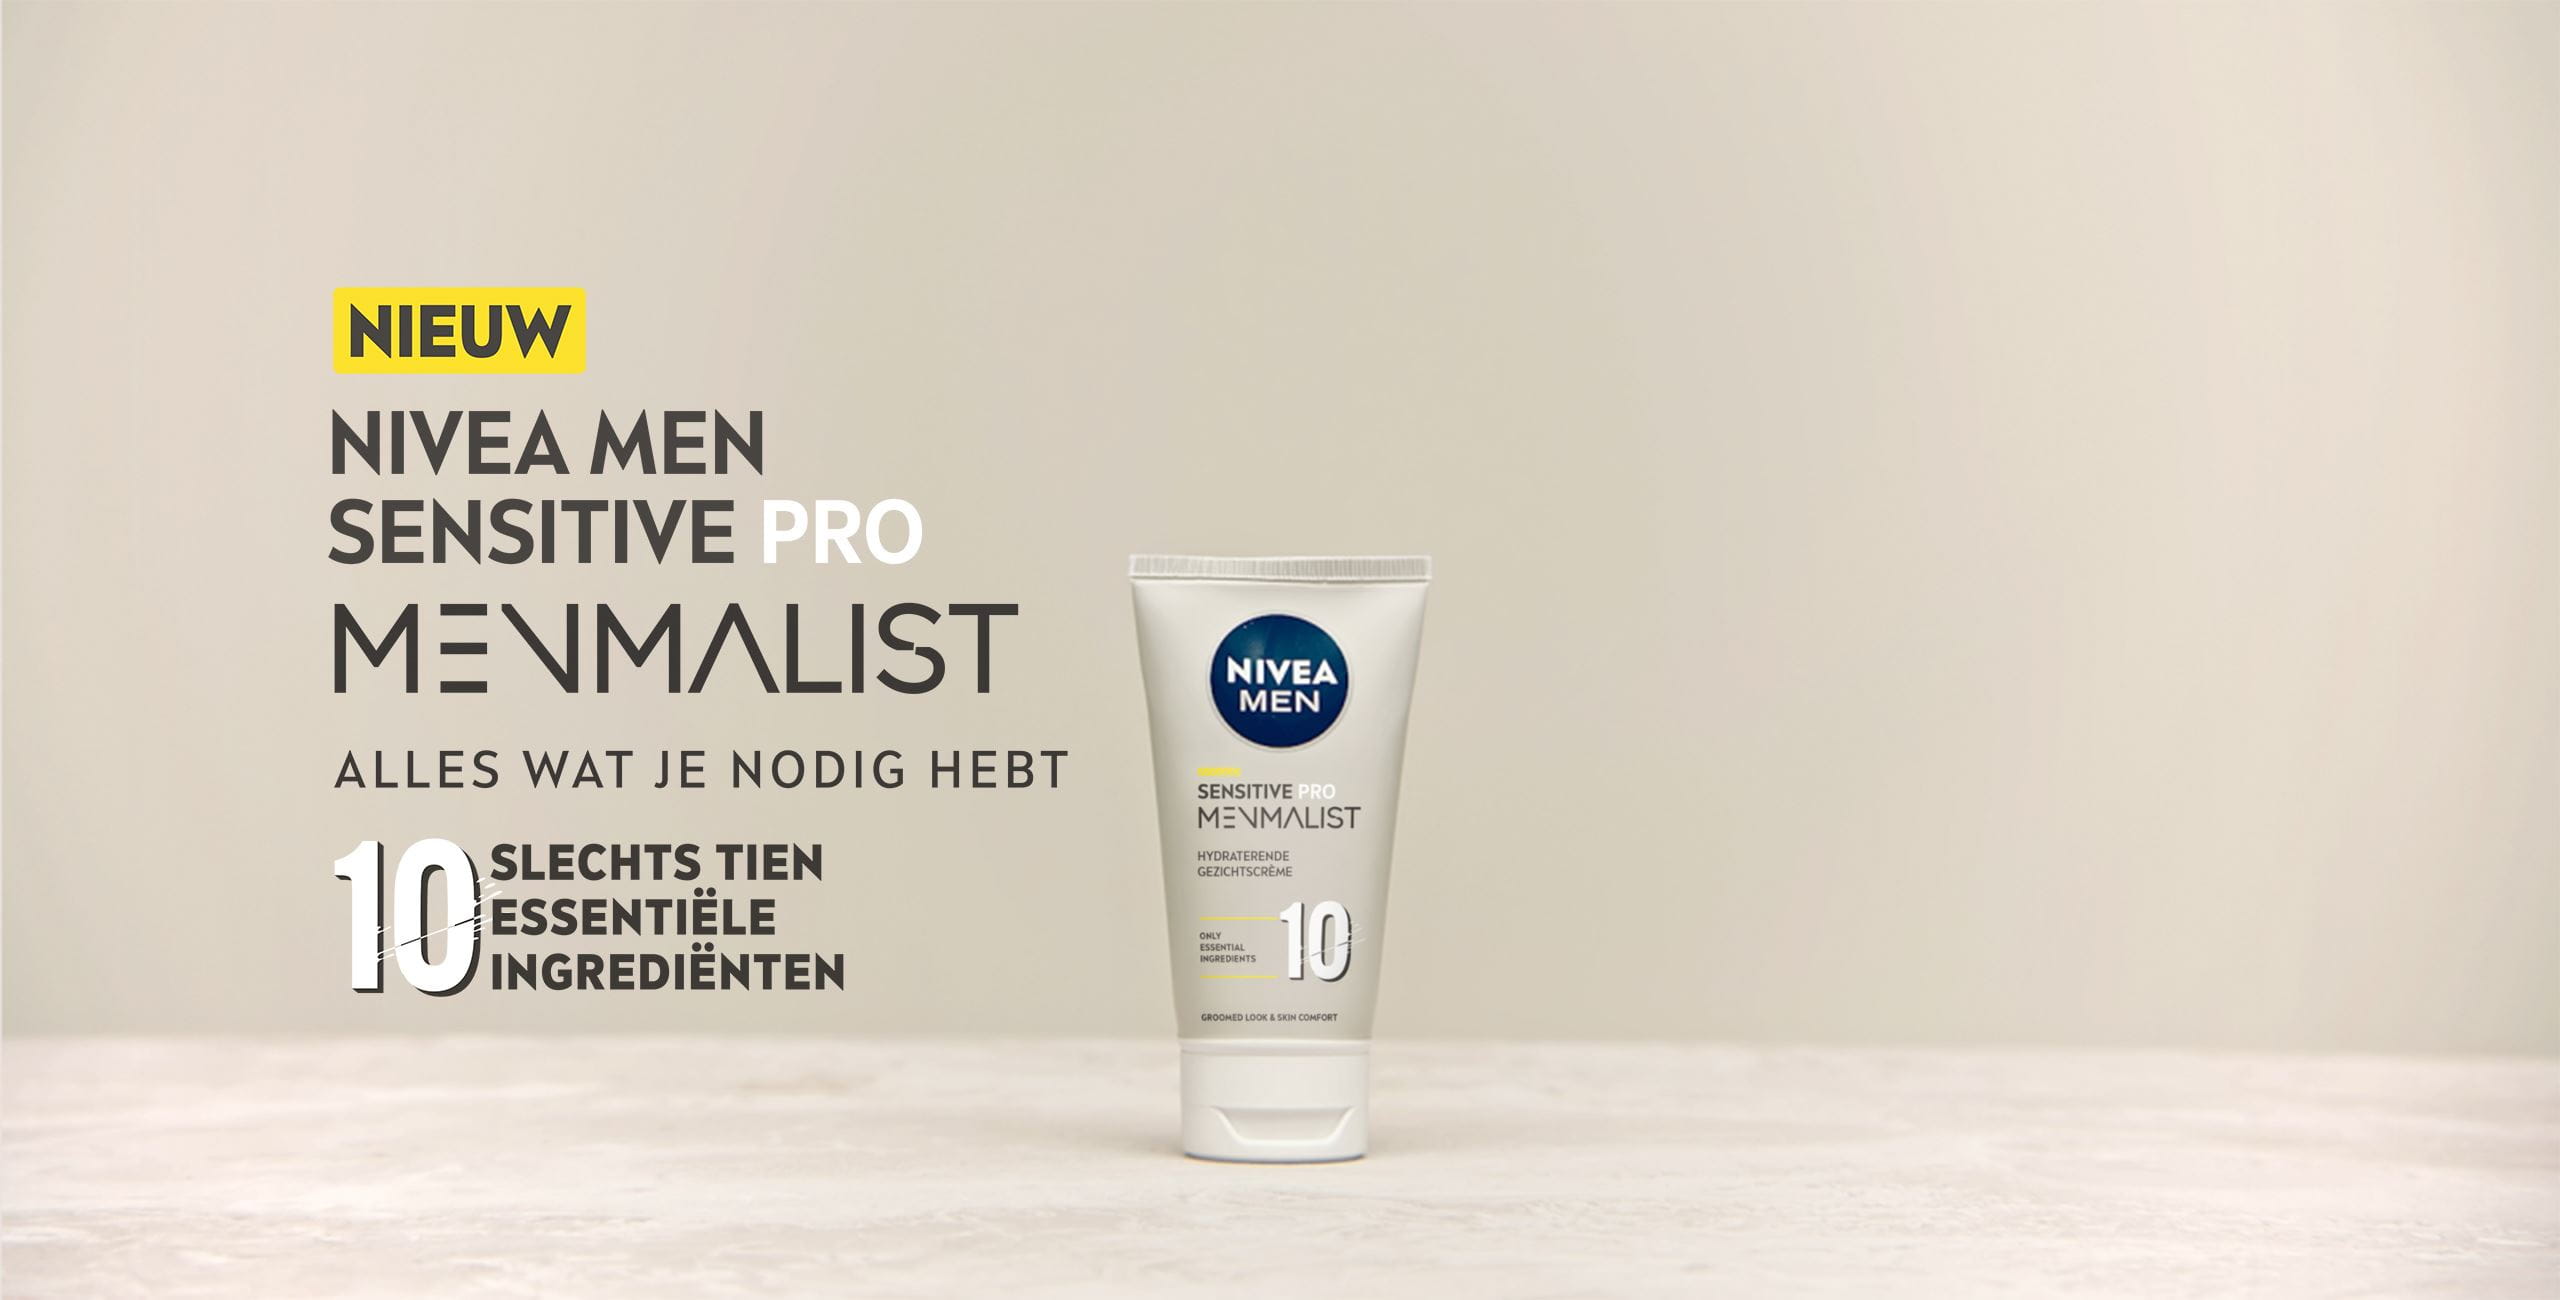 New NIVEA MEN Sensitive Pro Menmalist with 10 essential ingredients only